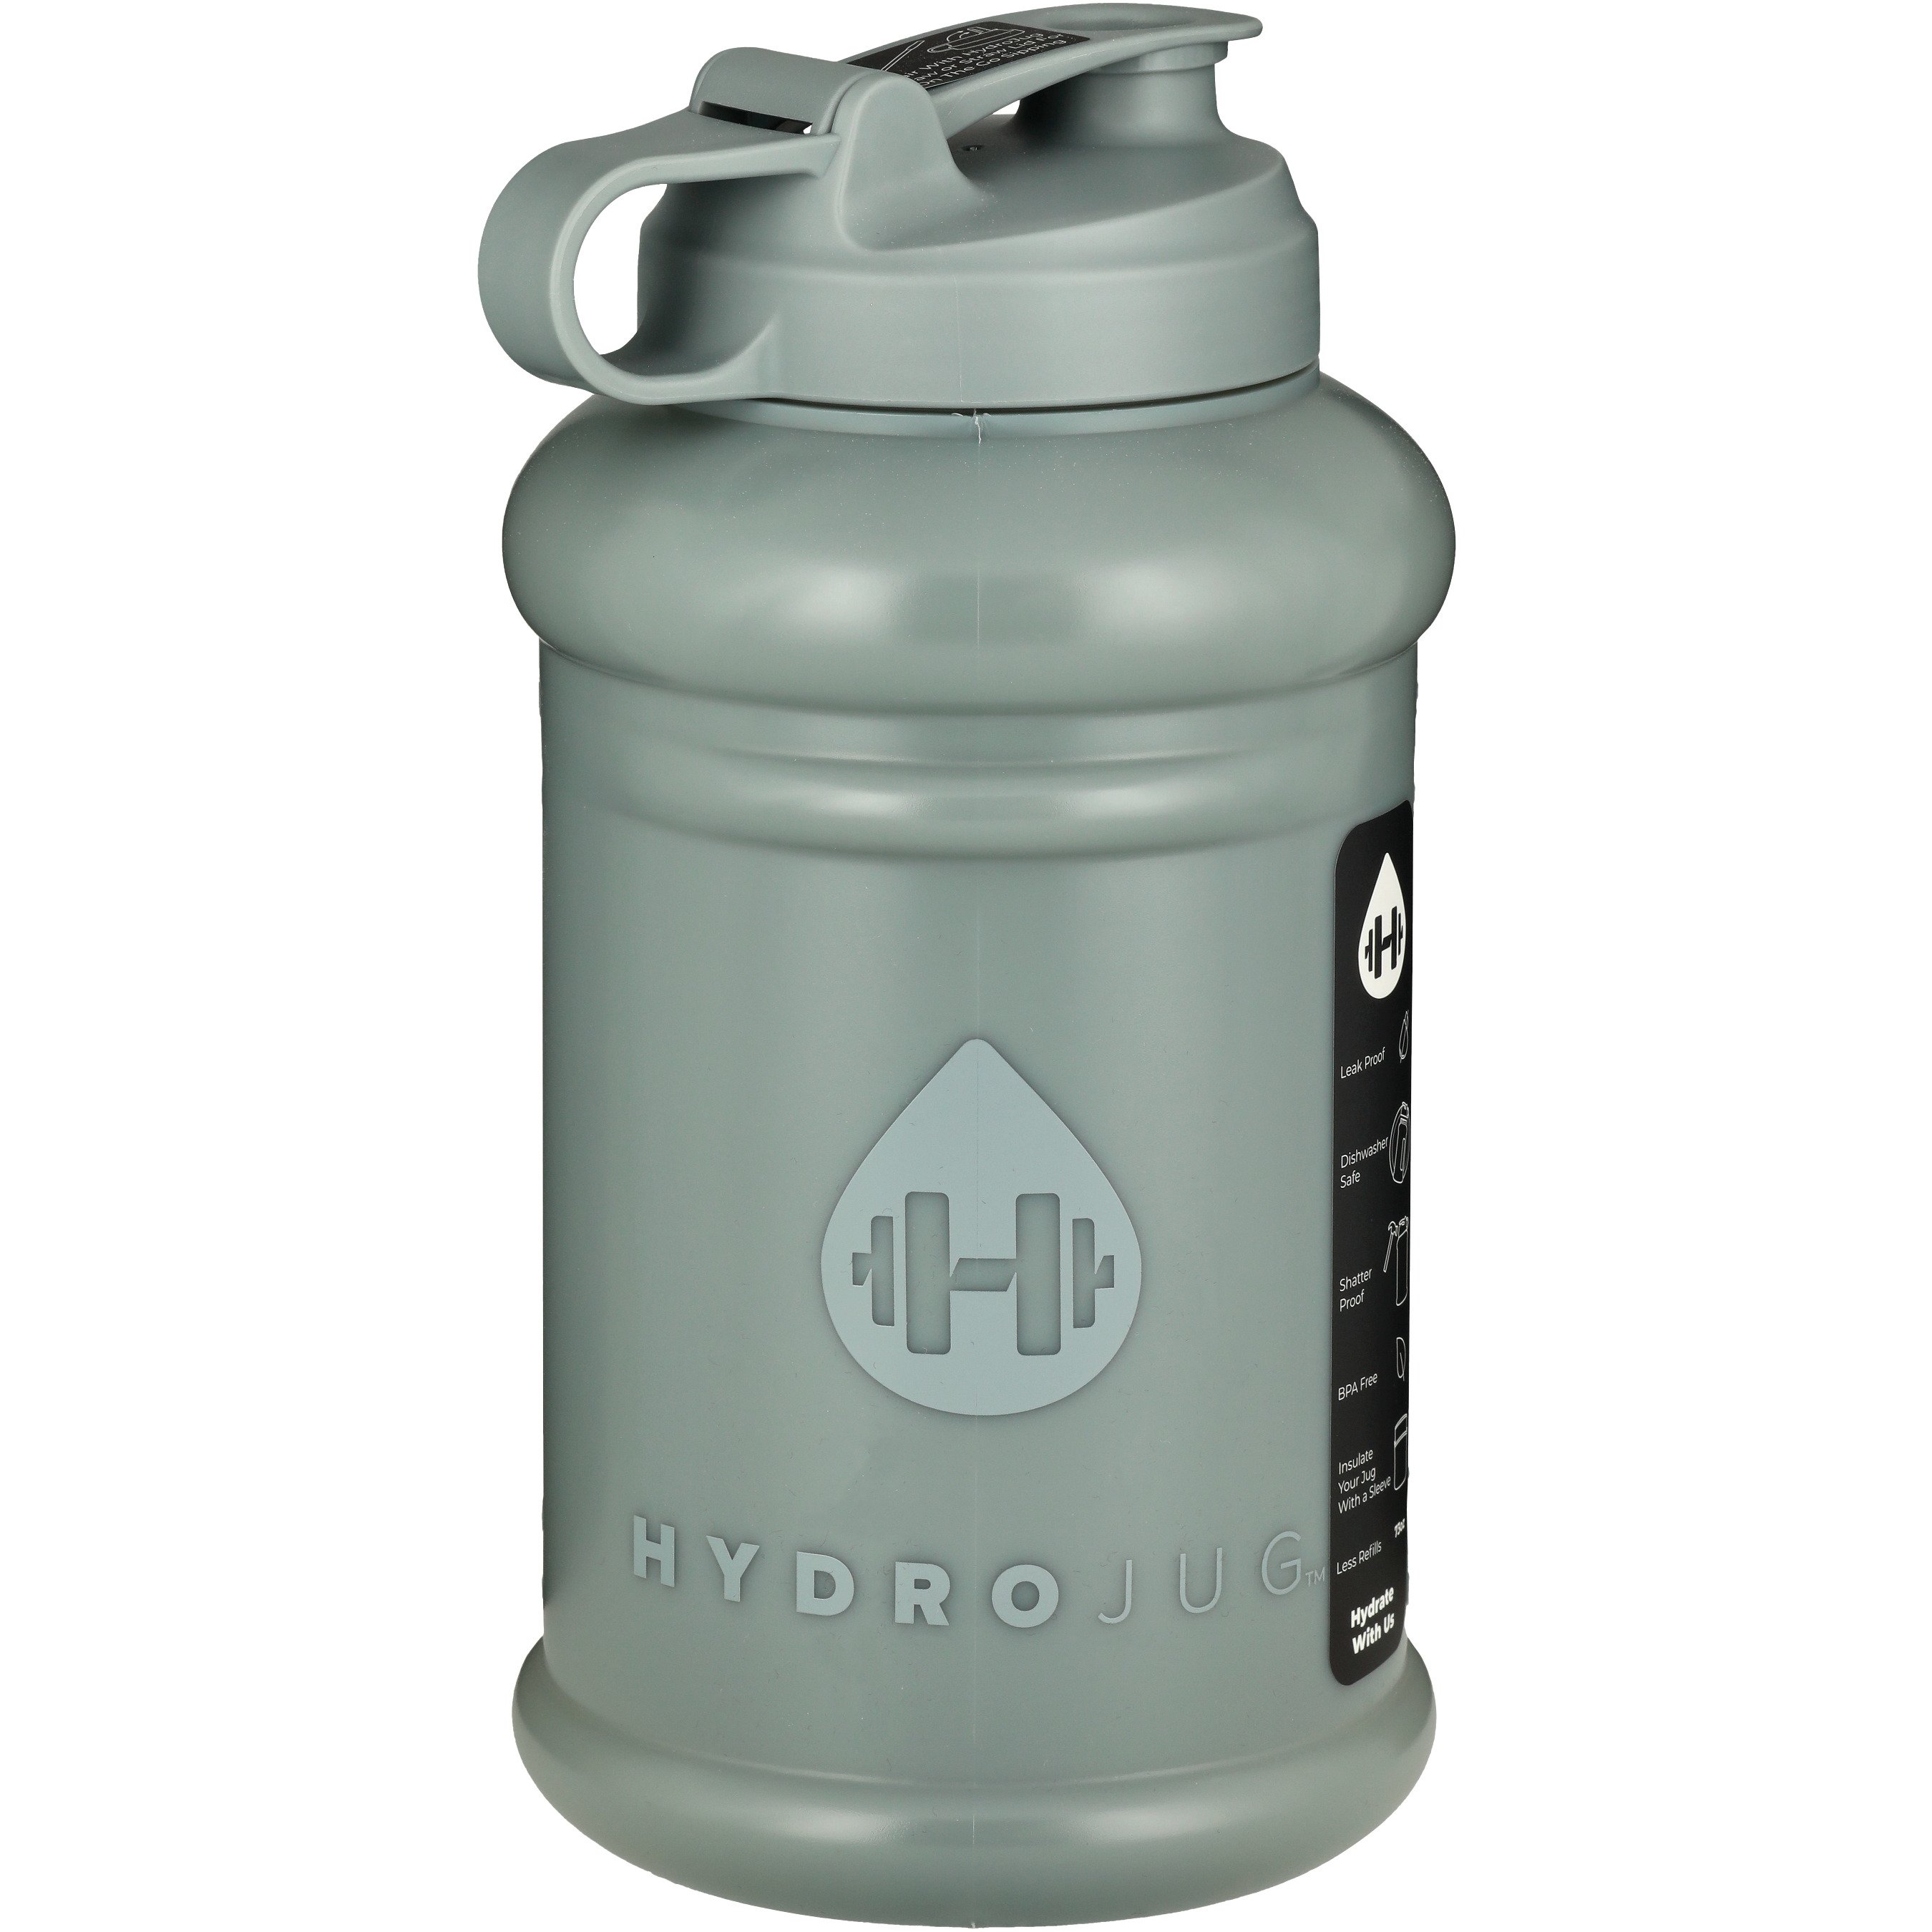 What Is A Tumbler? - HydroJug